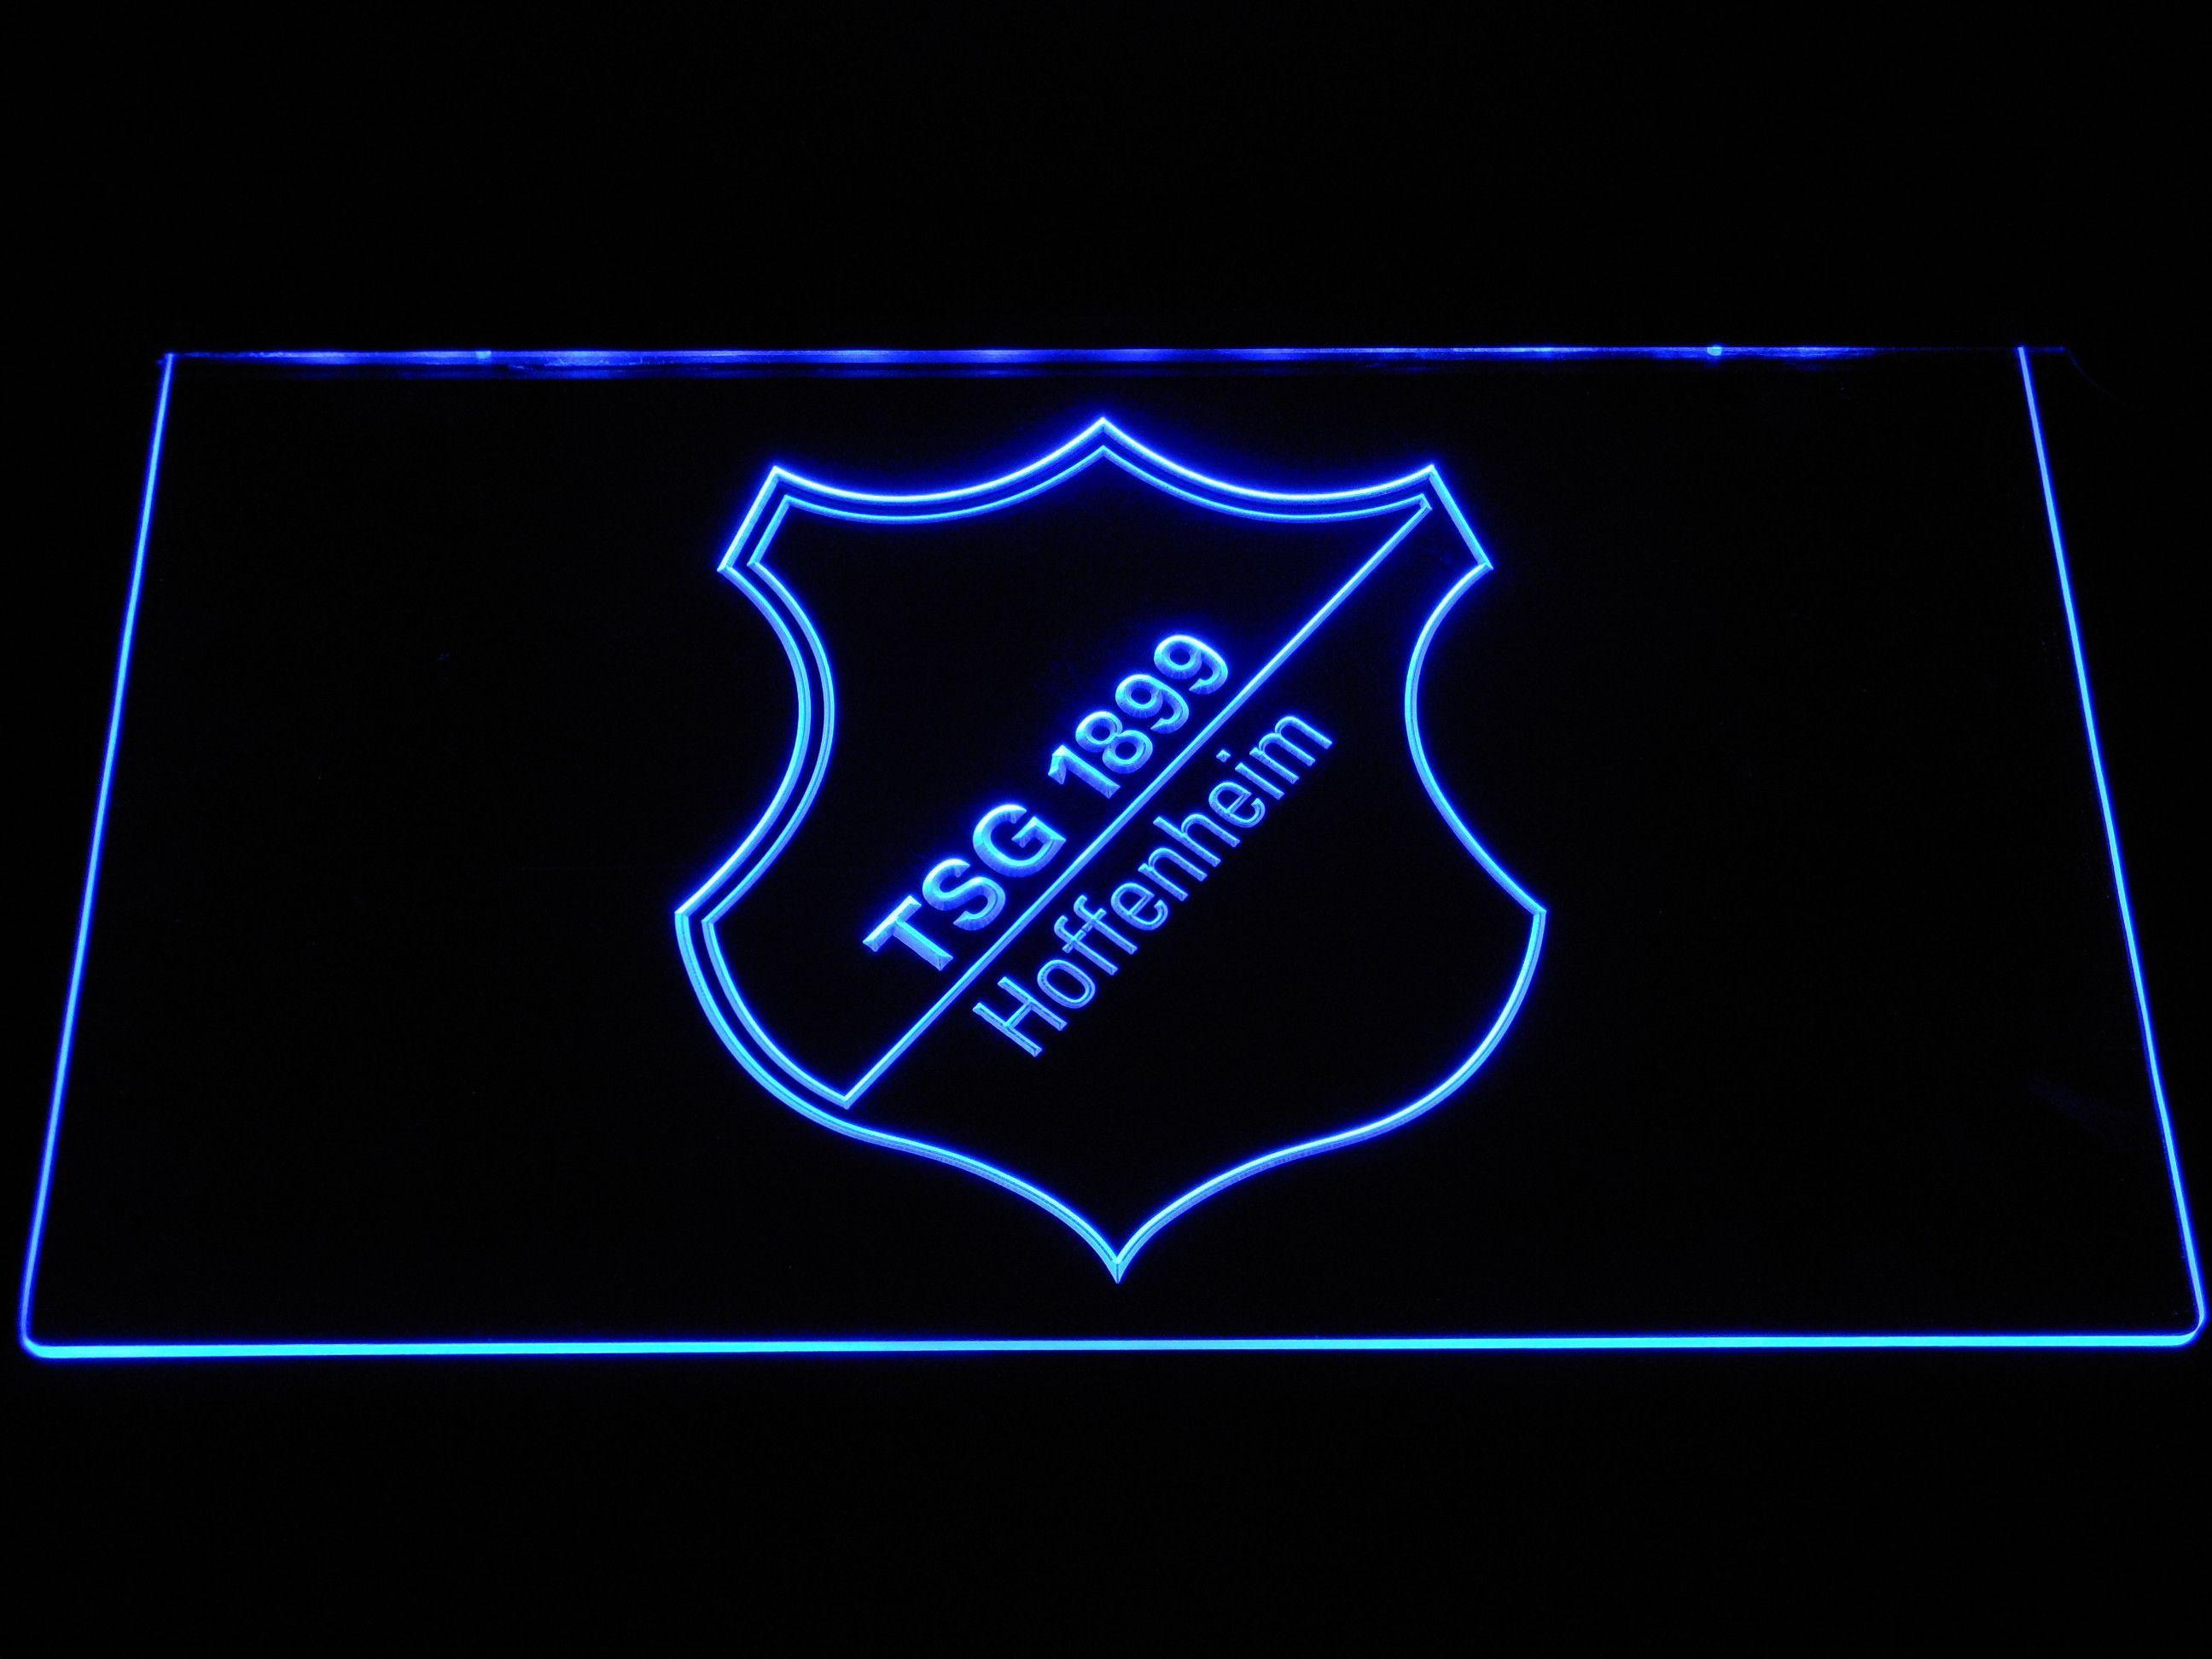 TSG 1899 Hoffenheim LED Neon Sign. Products. Led neon signs, New